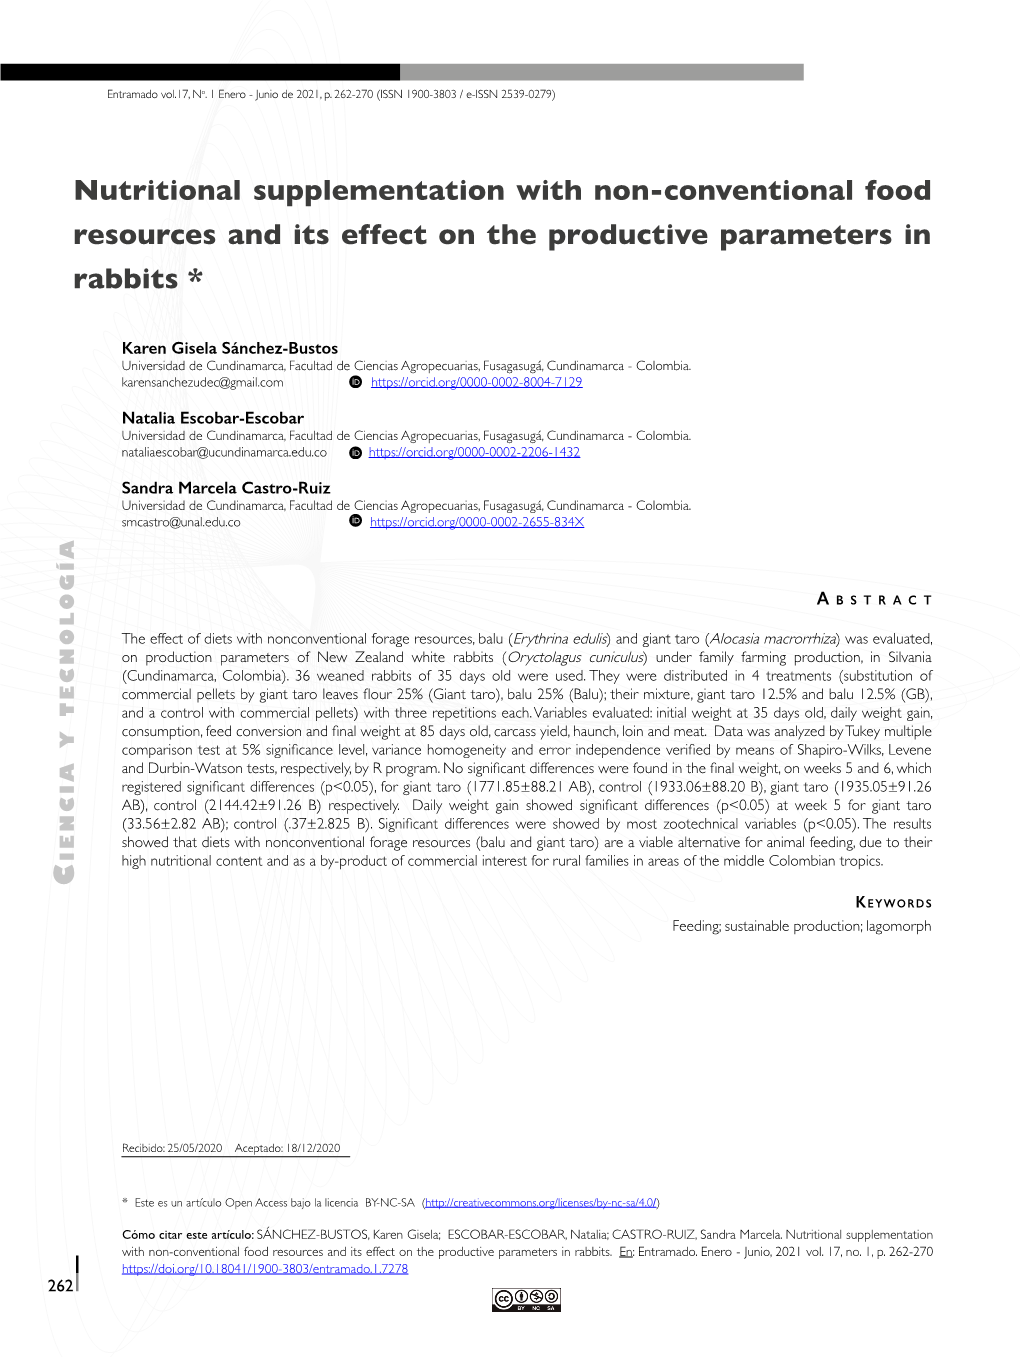 Nutritional Supplementation with Non-Conventional Food Resources and Its Effect on the Productive Parameters in Rabbits *